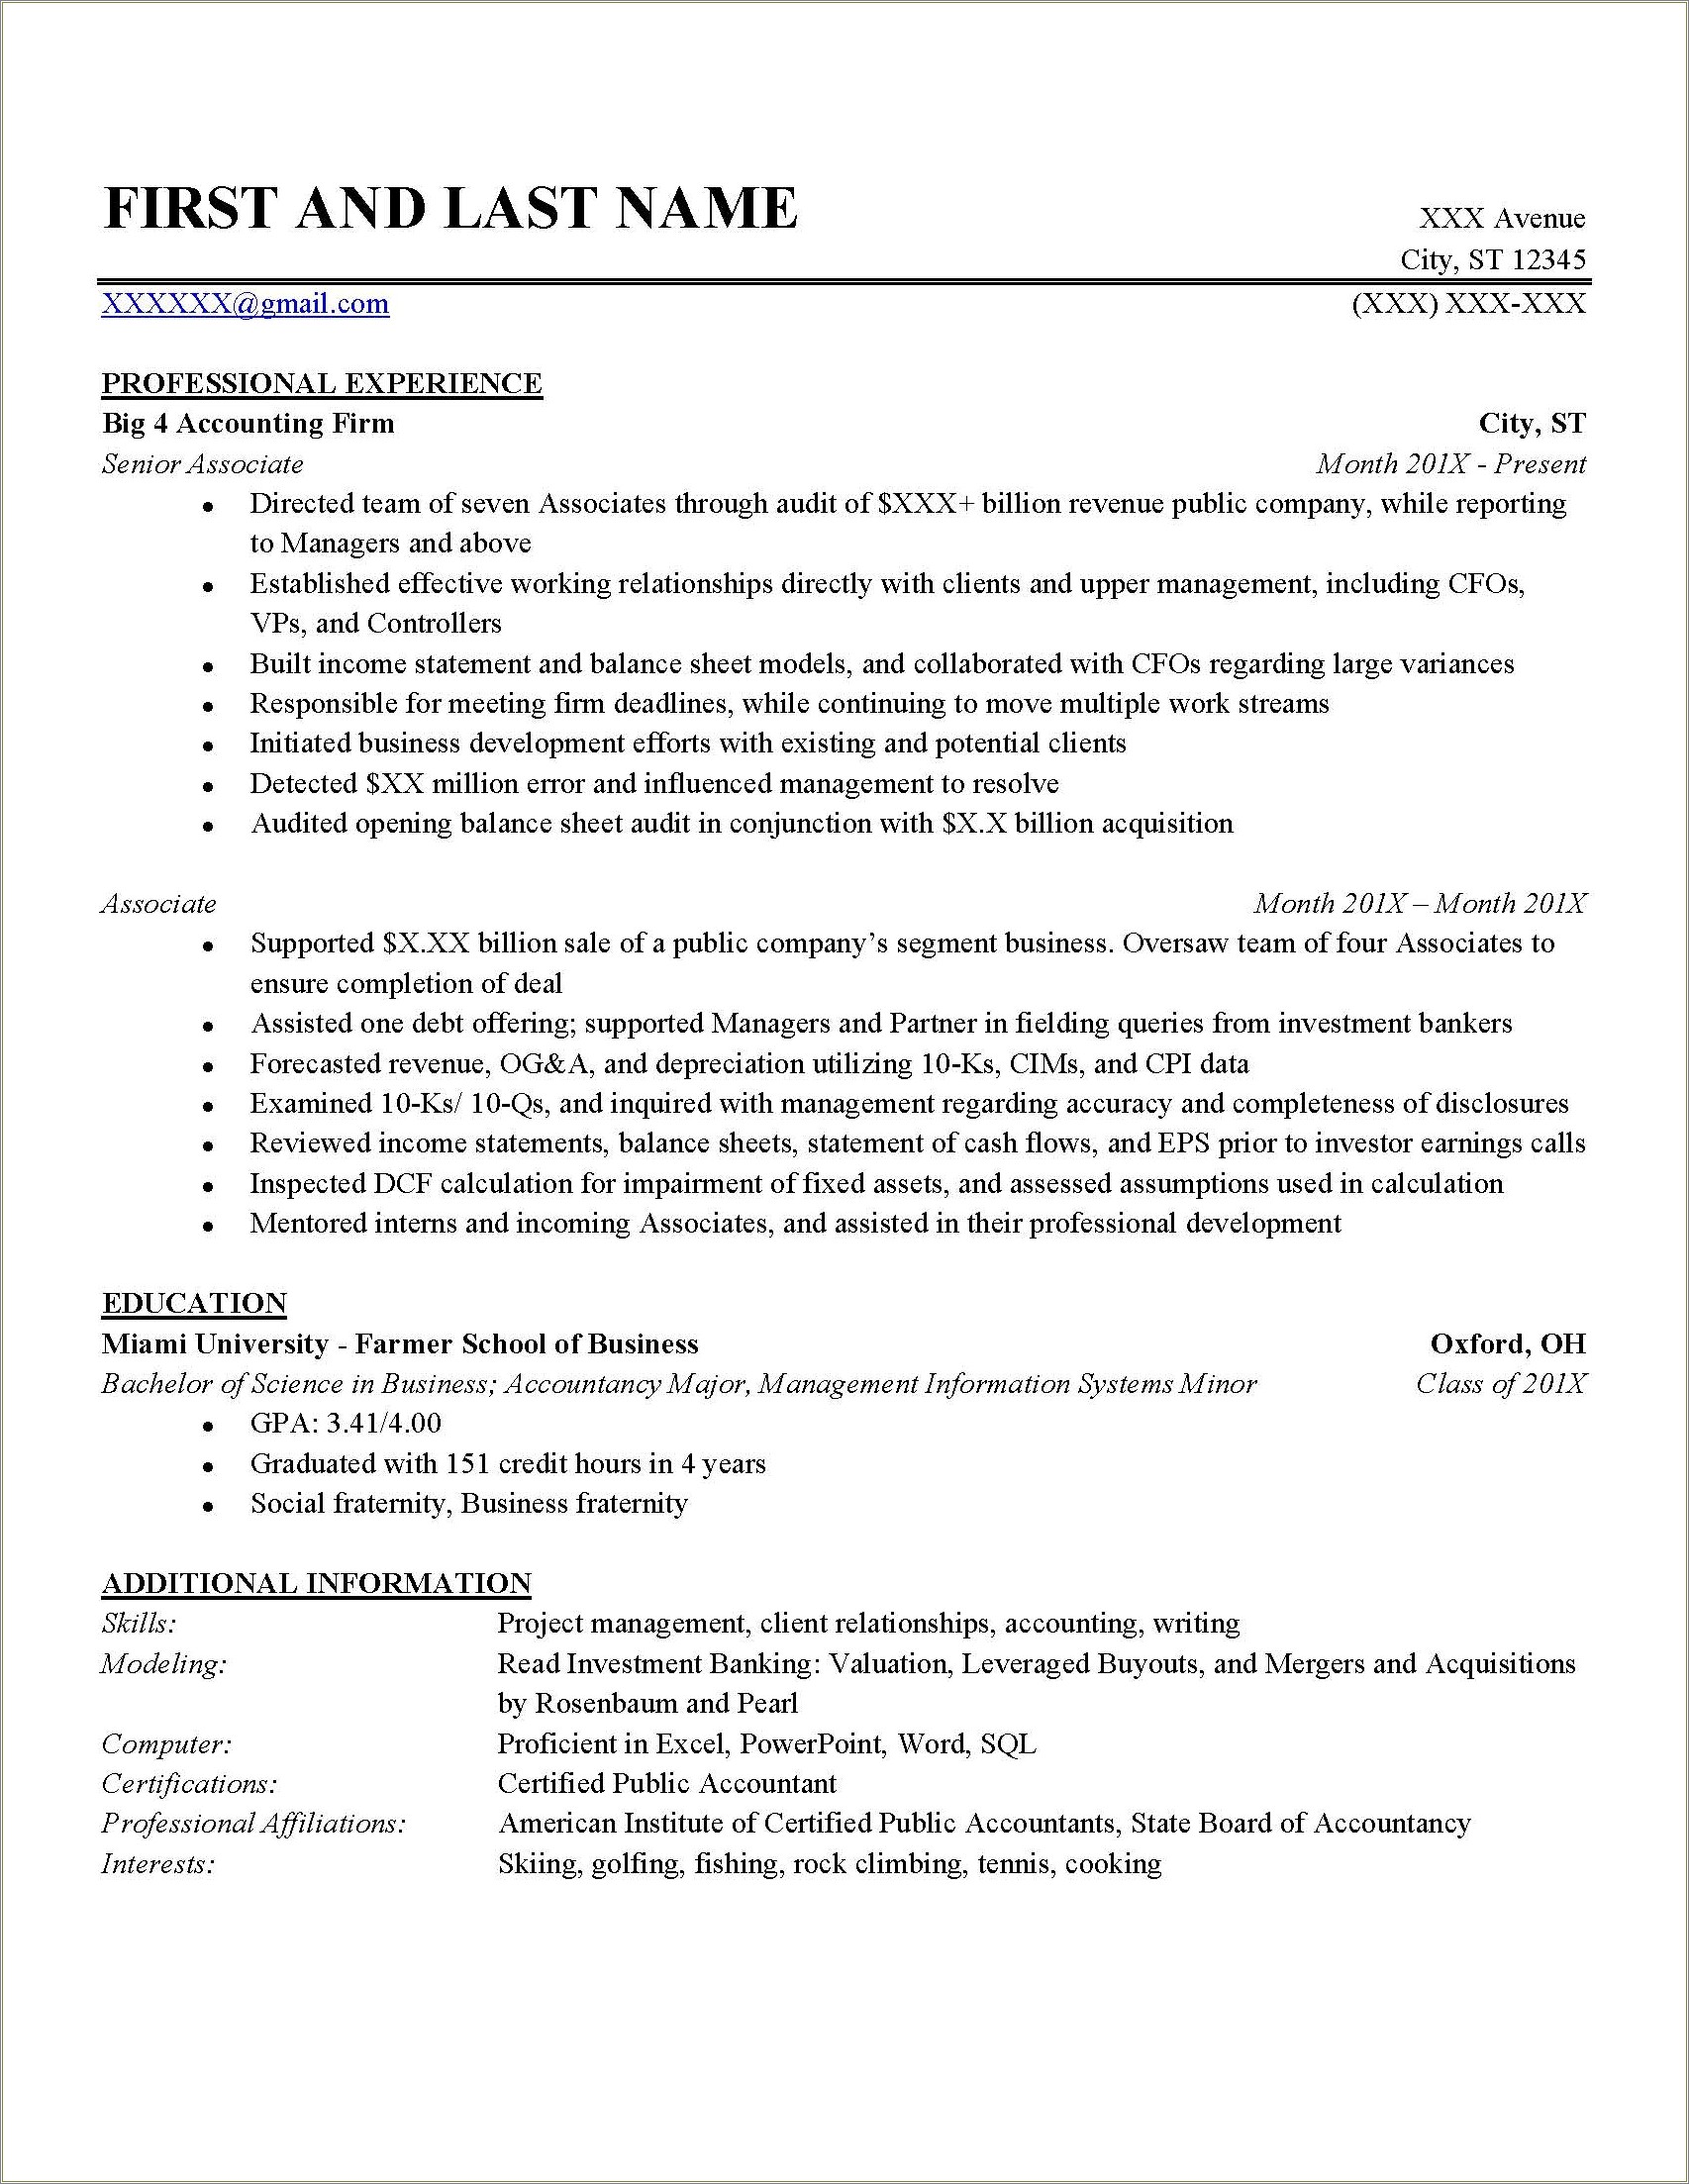 Wso Financial Modeling Experience On Resume Investment Banking